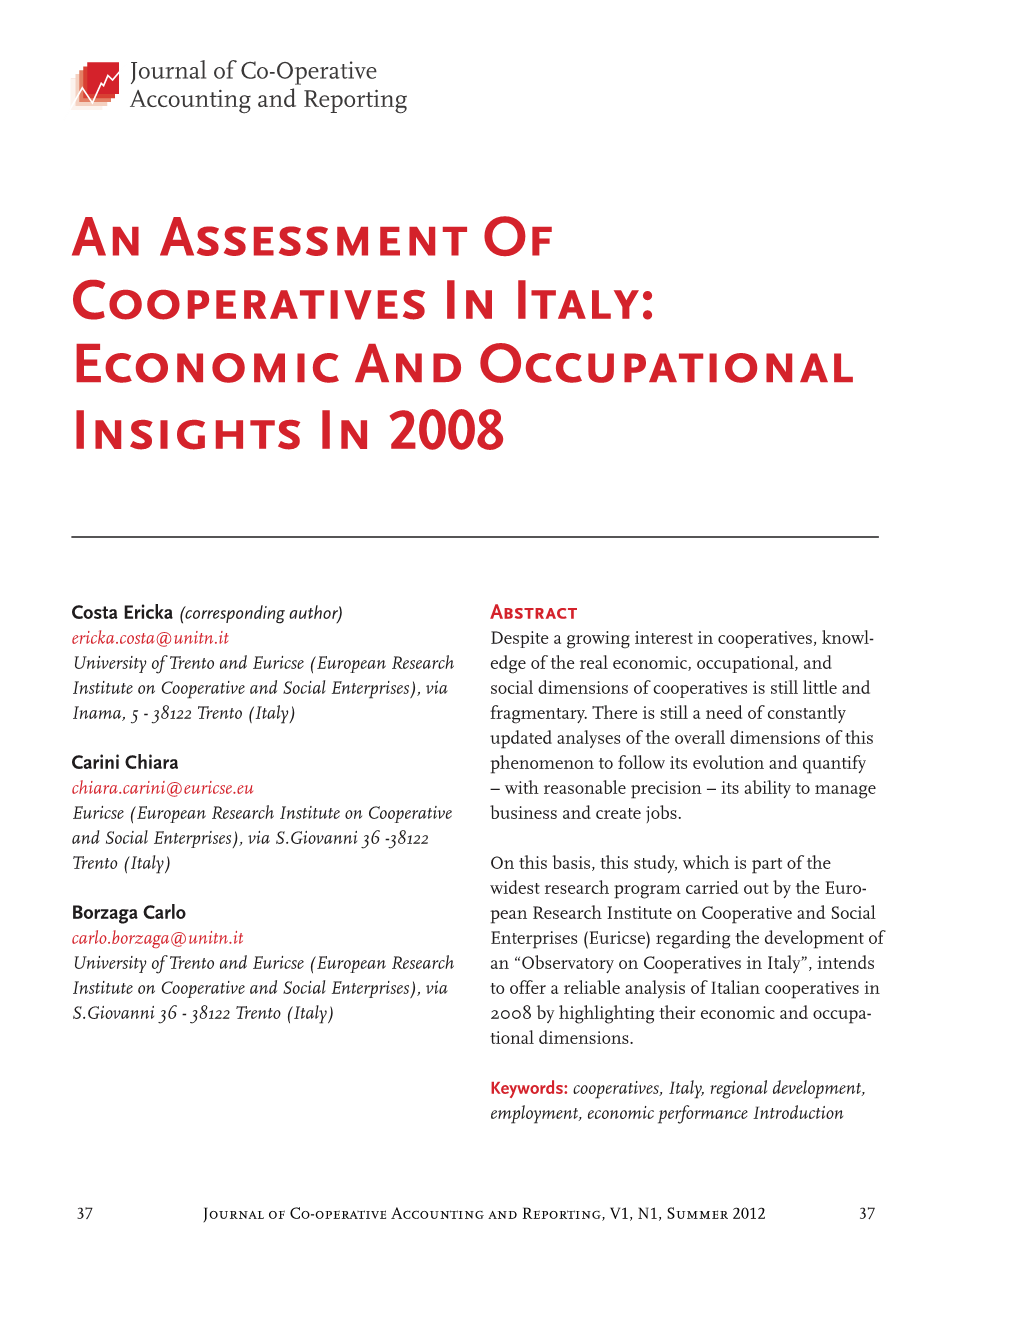 An Assessment of Cooperatives in Italy: Economic and Occupational